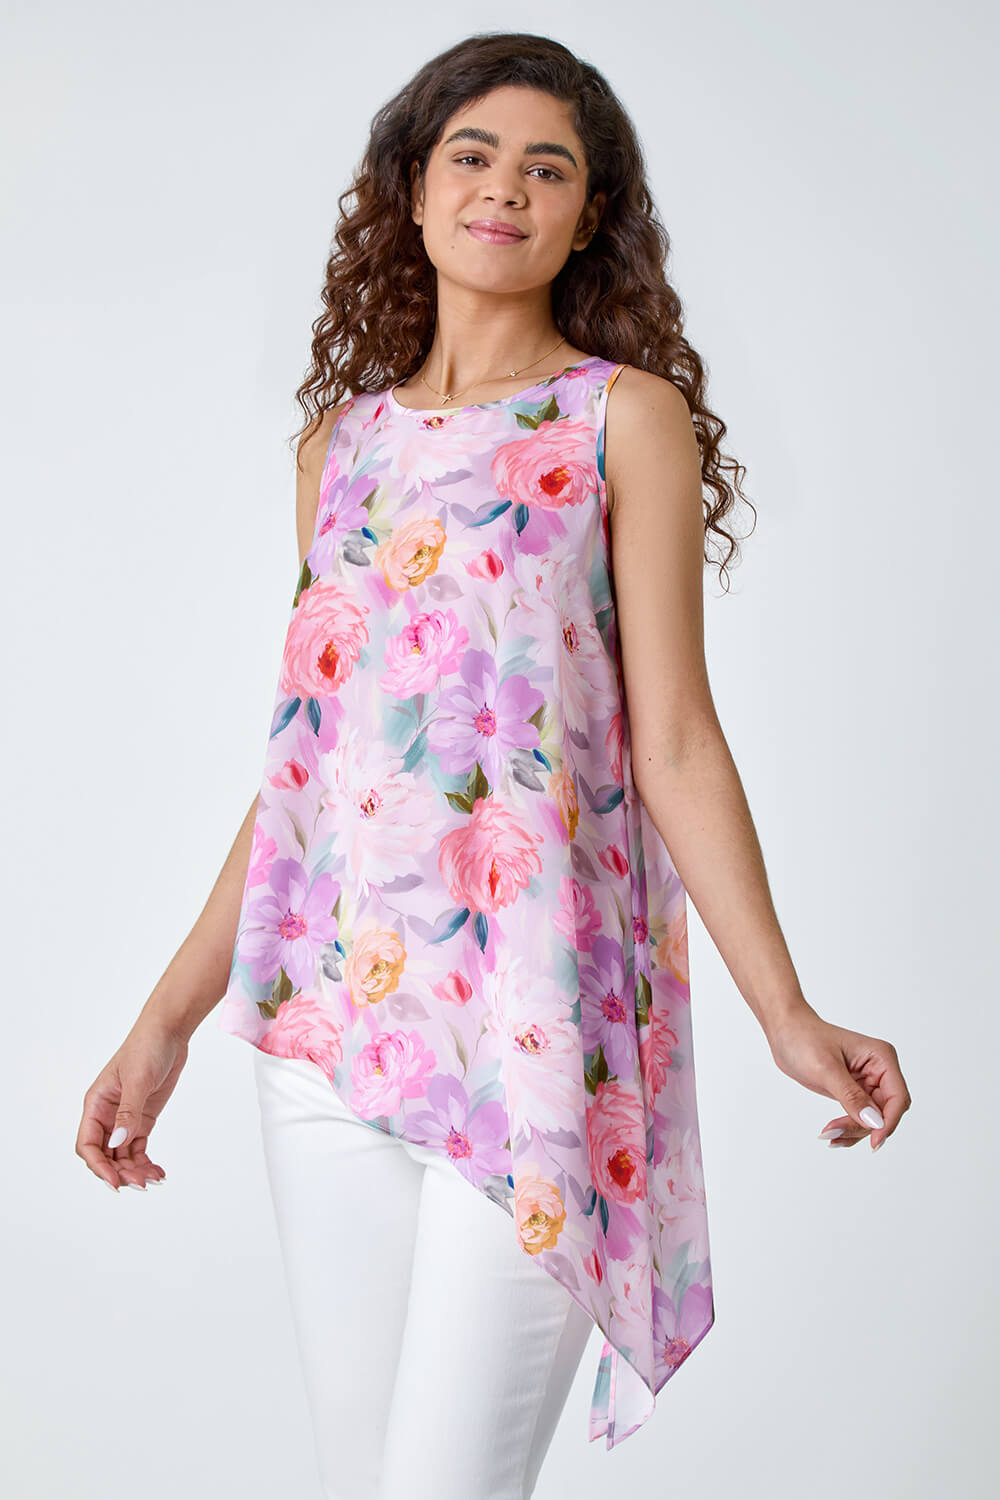 Lilac Floral Asymmetric Top, Image 2 of 6